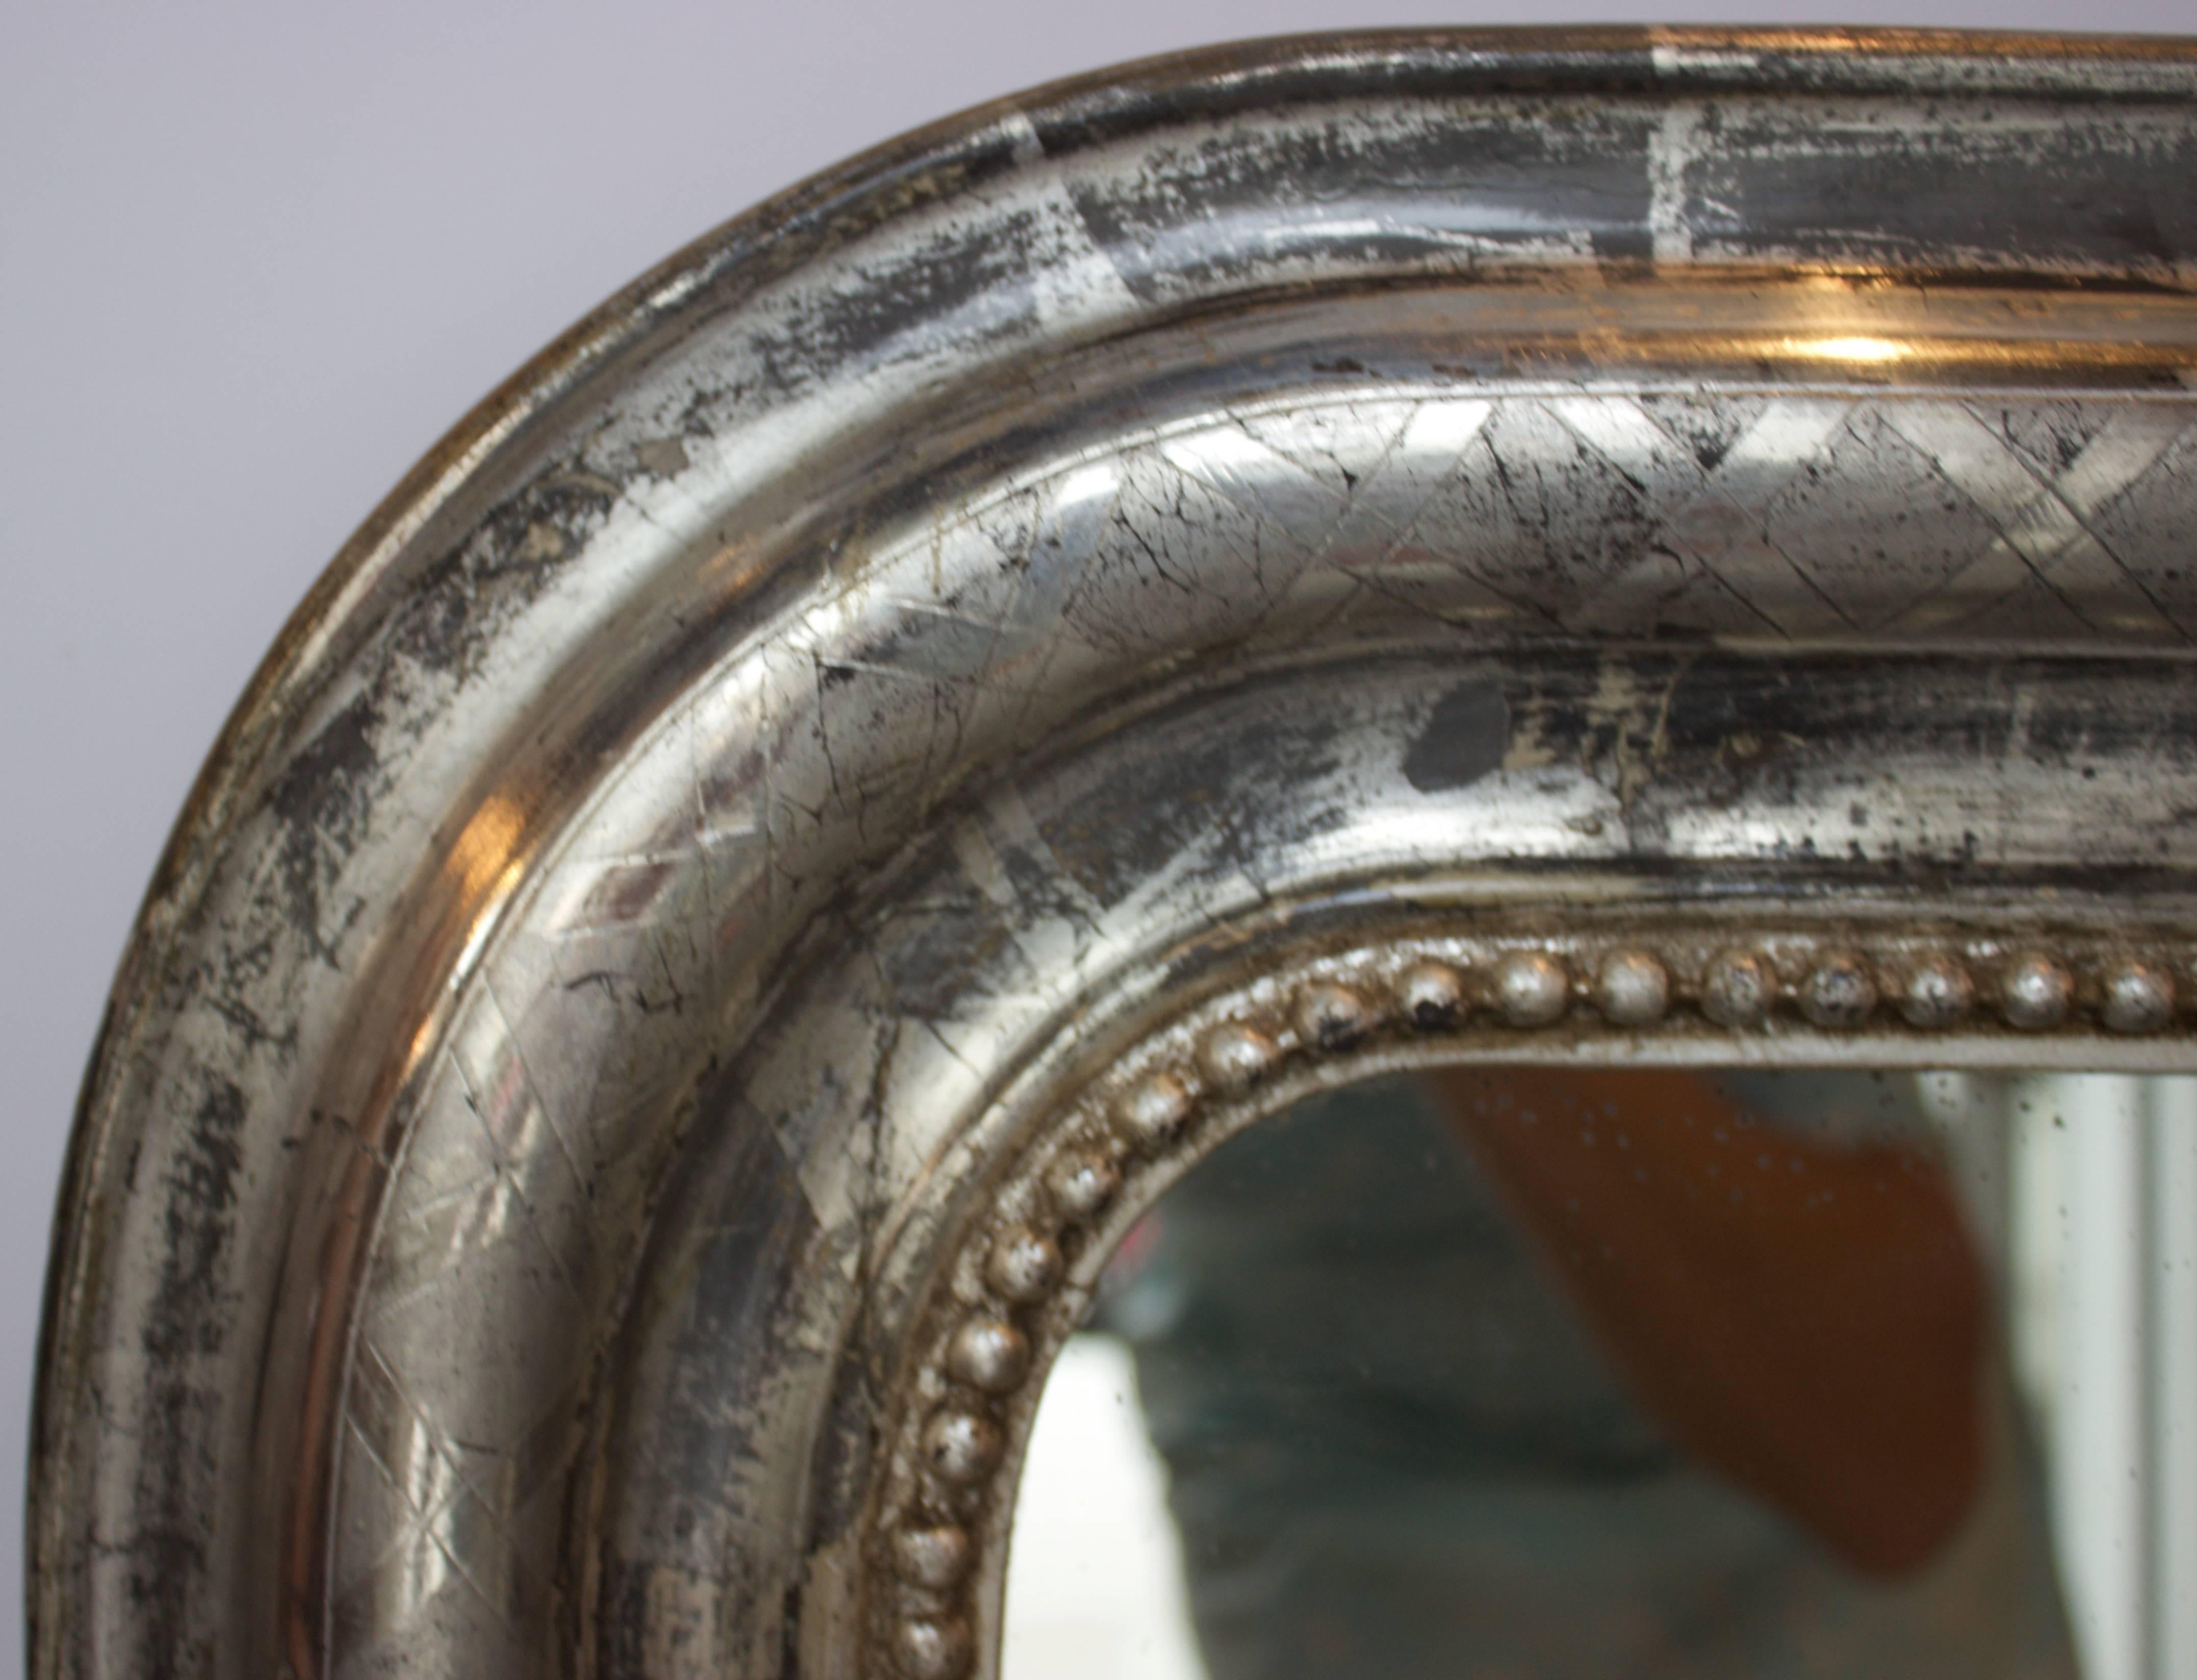 Hand Carved and Silver Gilt Louis Philippe Mirror with Lattice Carving and a Row of Carved and Silver Gilt Pearls. Mirror has its original Silvered Glass Mirror and Wooden Back.